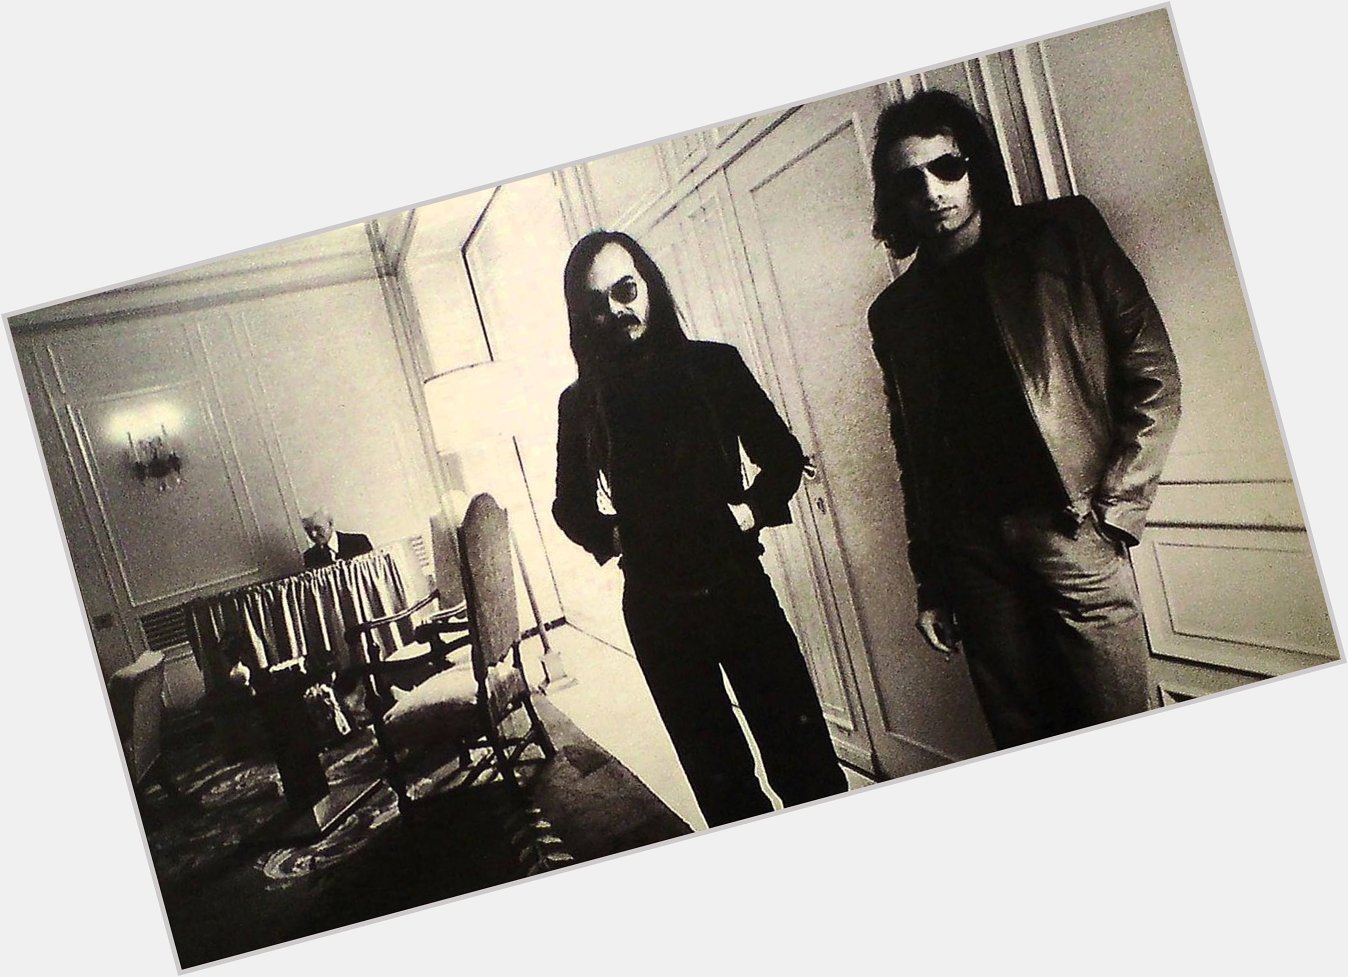  Happy Birthday to Donald Fagen of Steely Dan. 

Today\s Topic: duo bands 